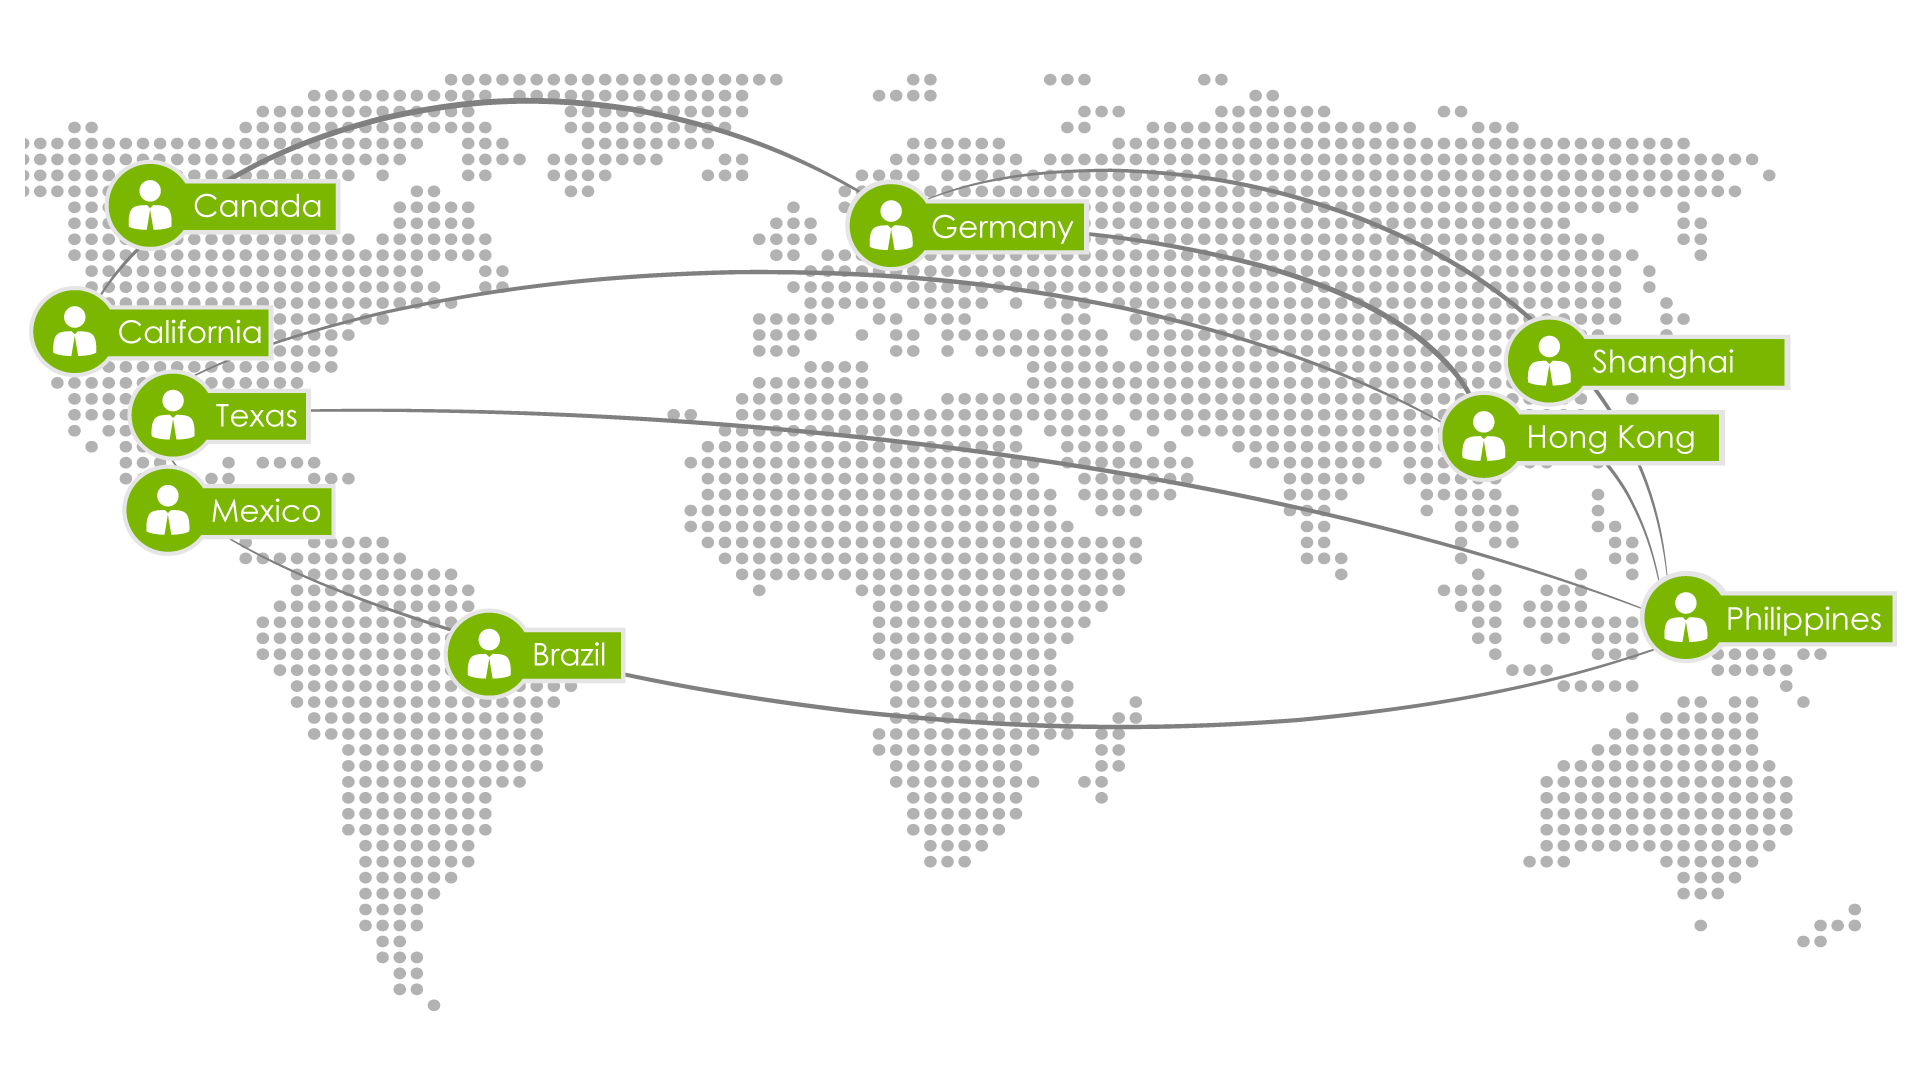 Worldwide Network of Suppliers Image